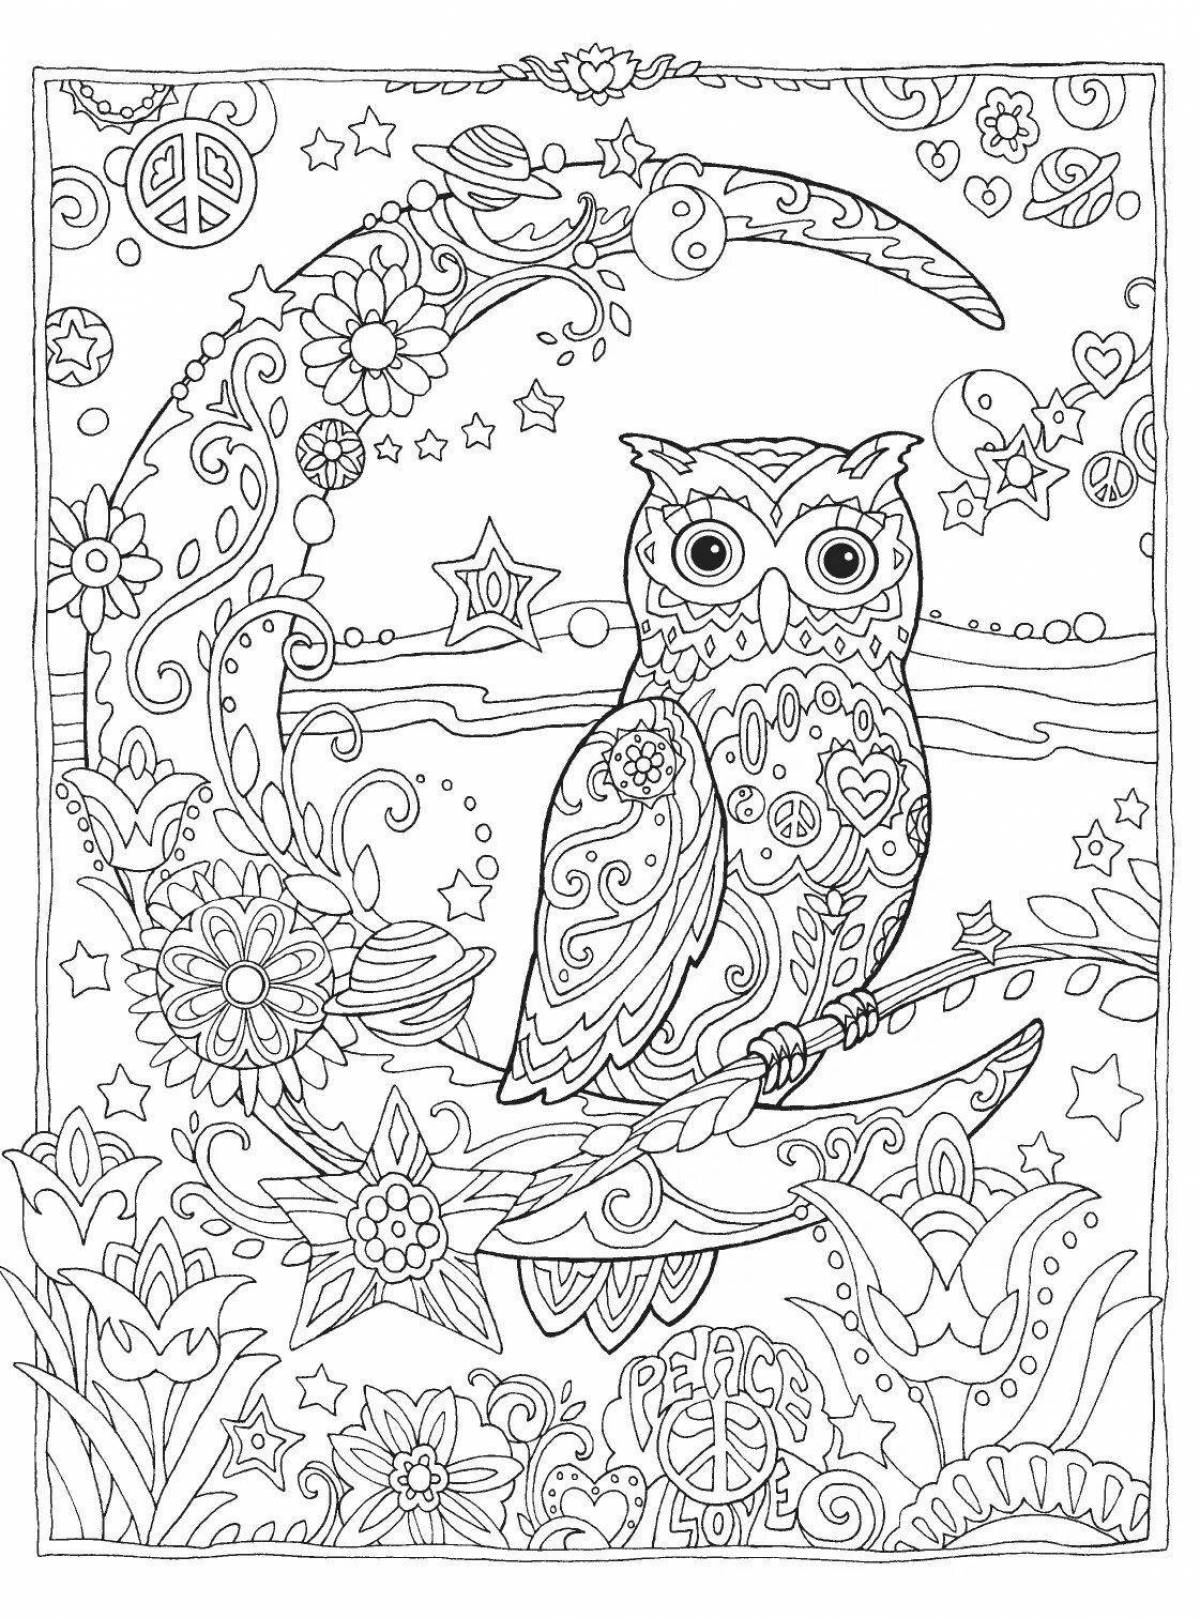 Coloring page of dynamic sedatives